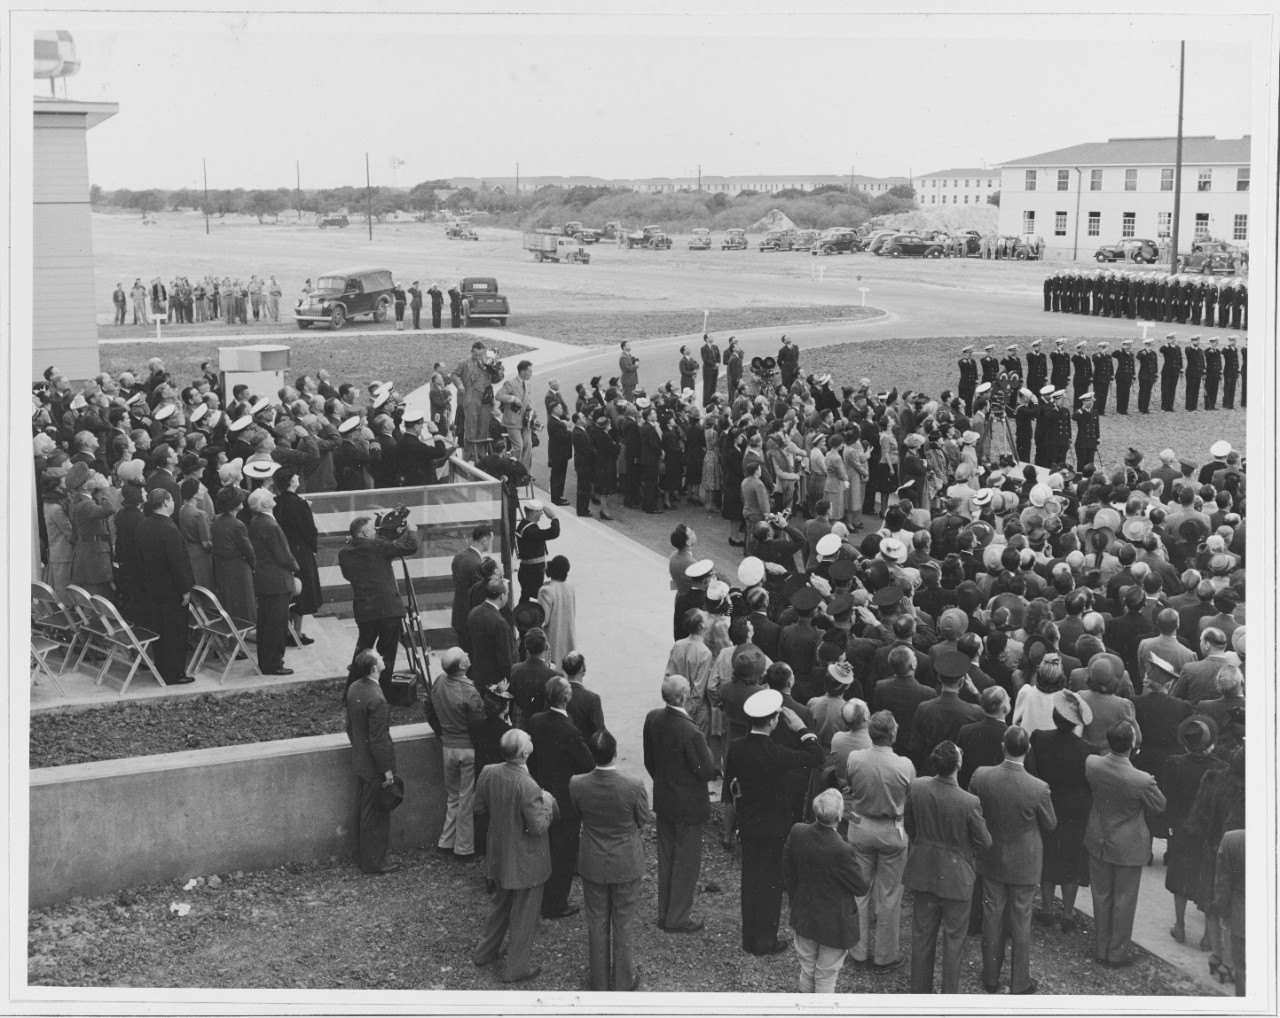 Watching the Air Show at Dedication of new U.S. Naval Air Station, March 12, 1941